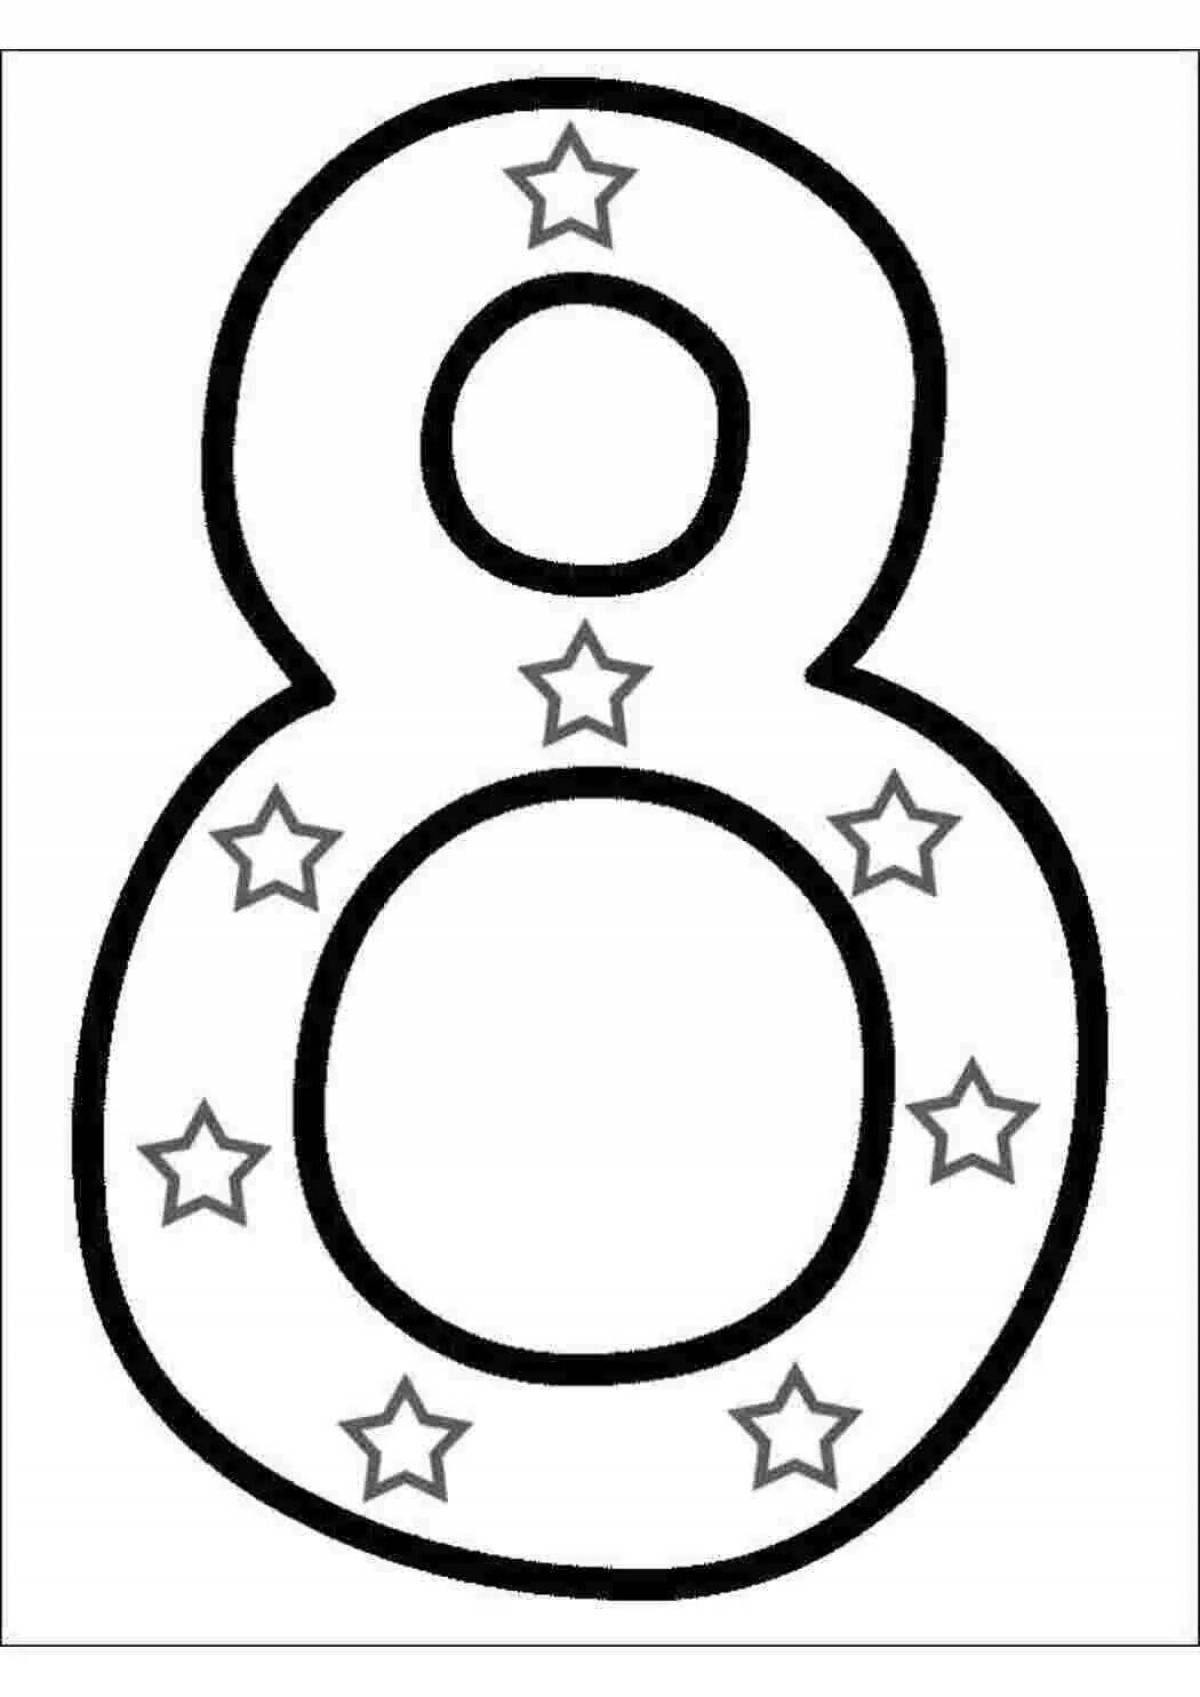 Coloring pages with number 8 for kids